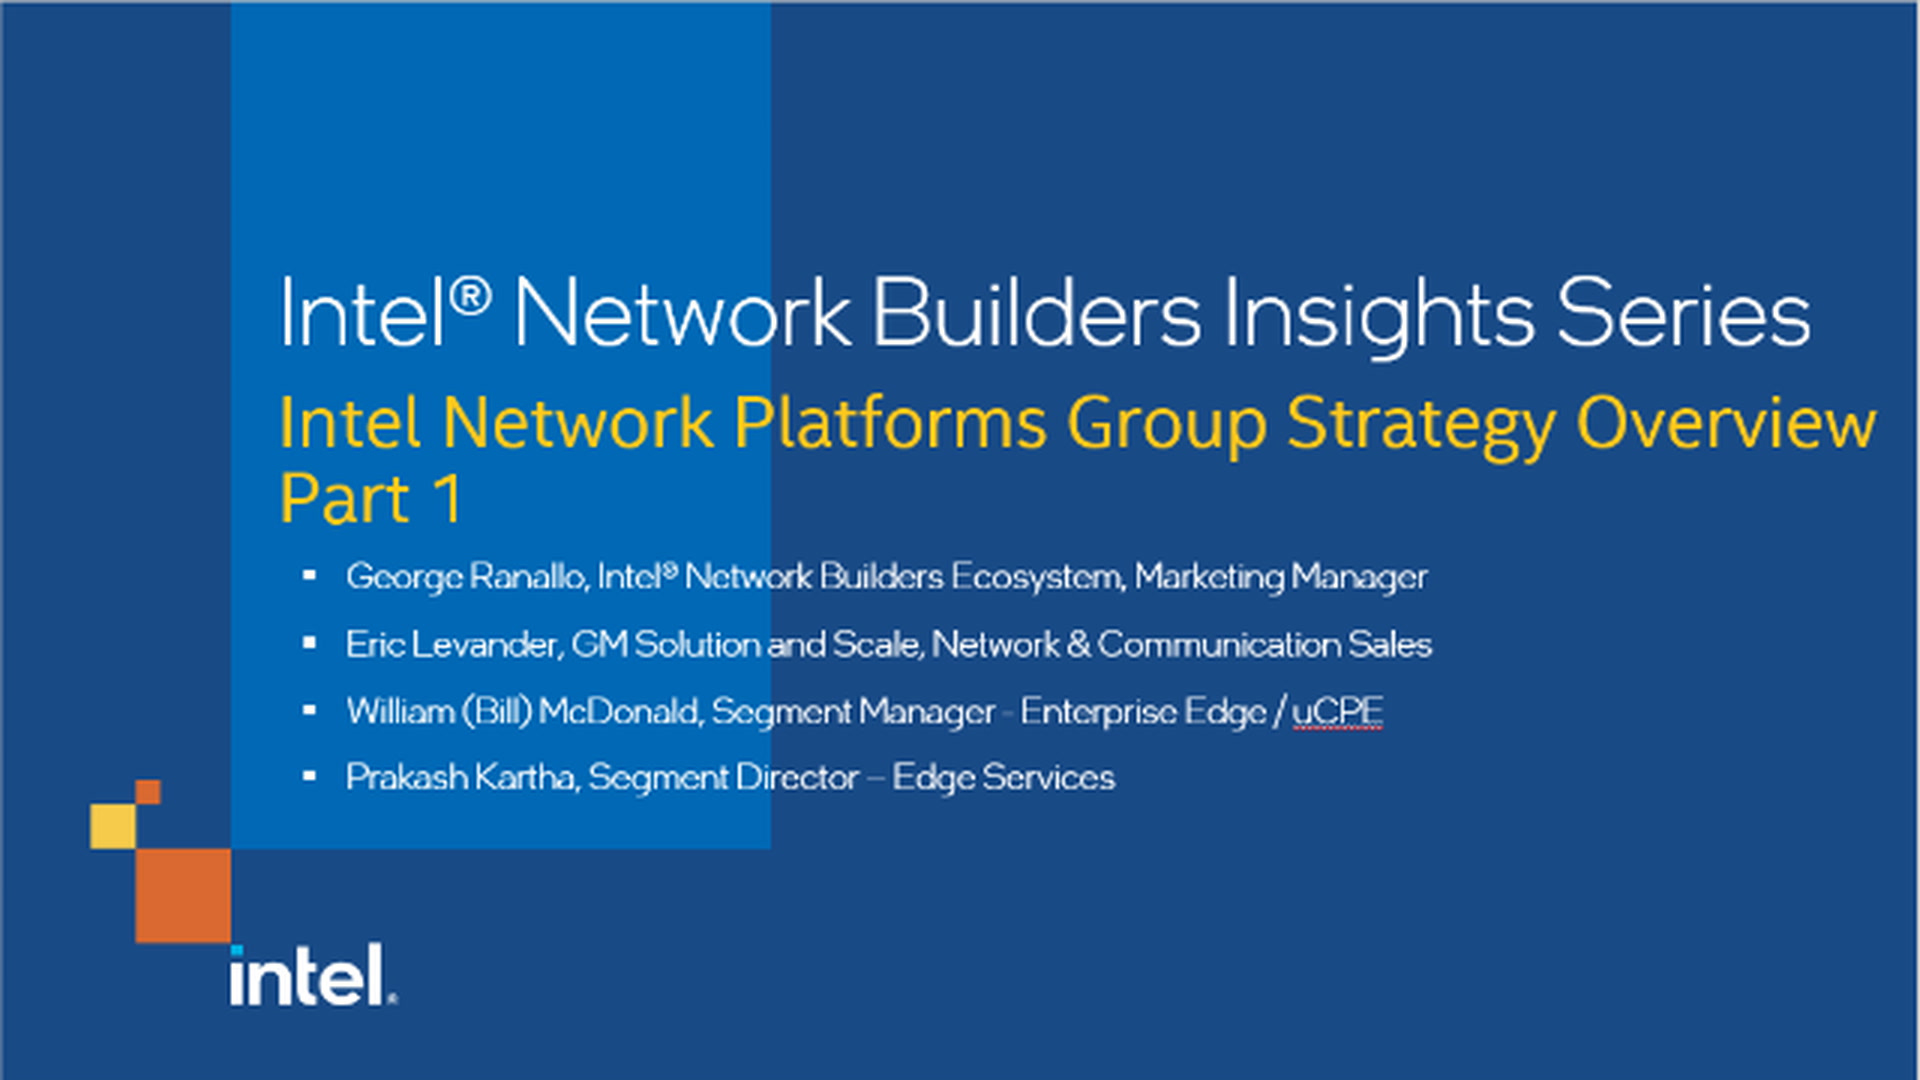 Intel Network Platforms Group Strategy Overview Part 1